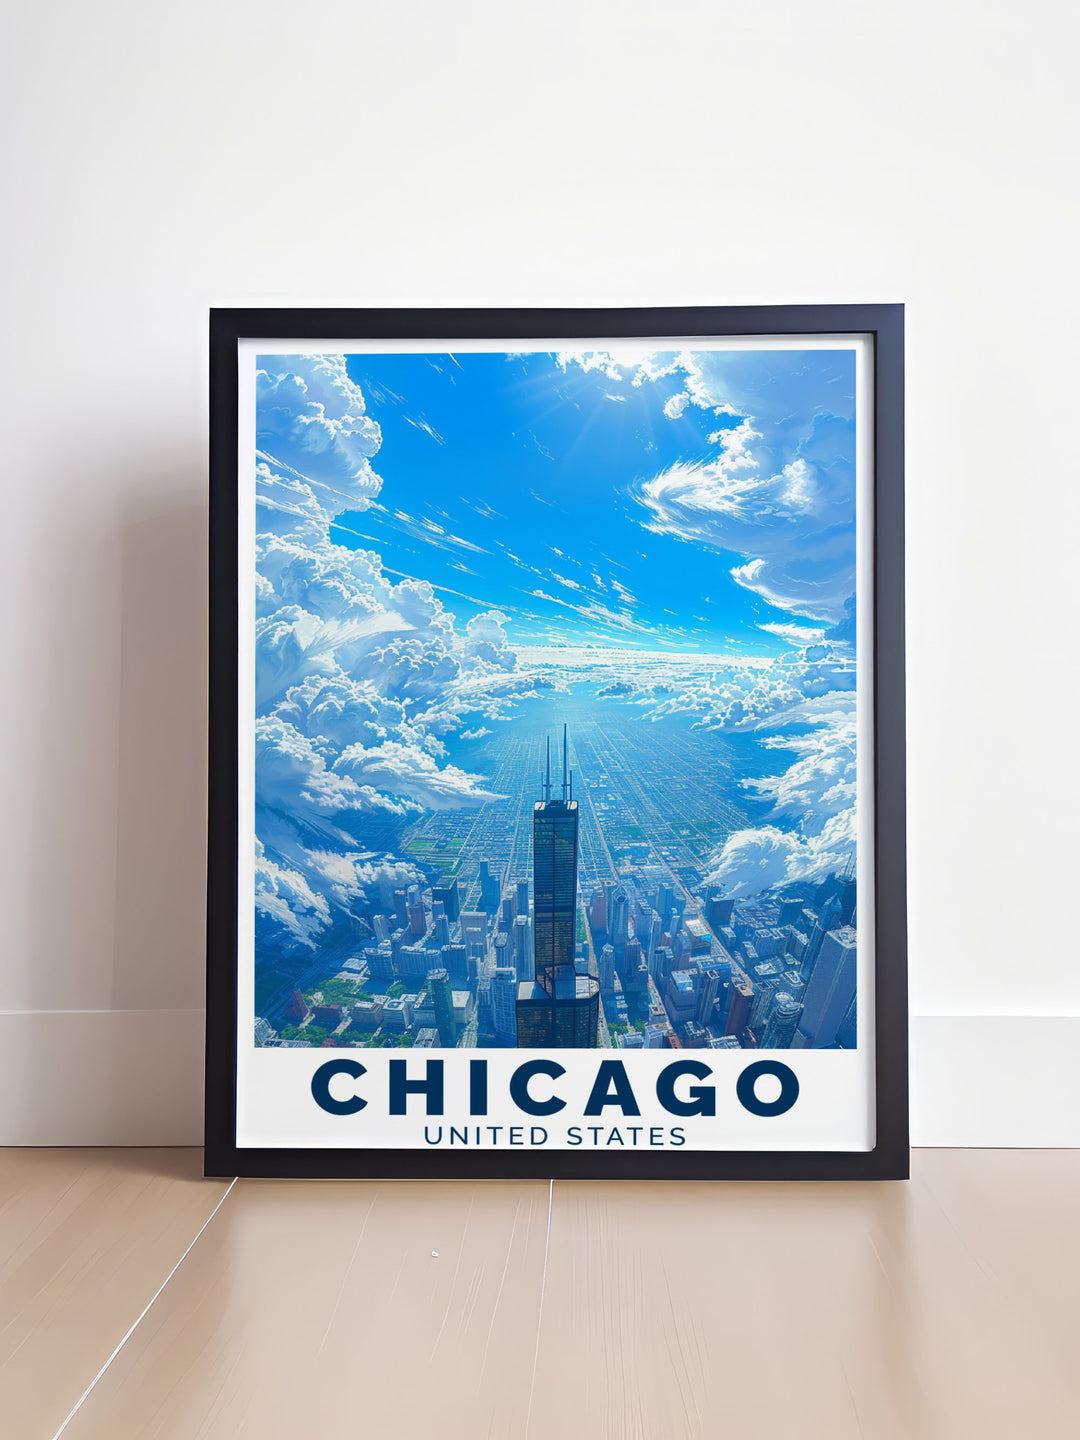 Chicago city map and Willis Tower prints combine modern city vibes with architectural beauty making this digital download a must have for lovers of Chicago photography and decor.